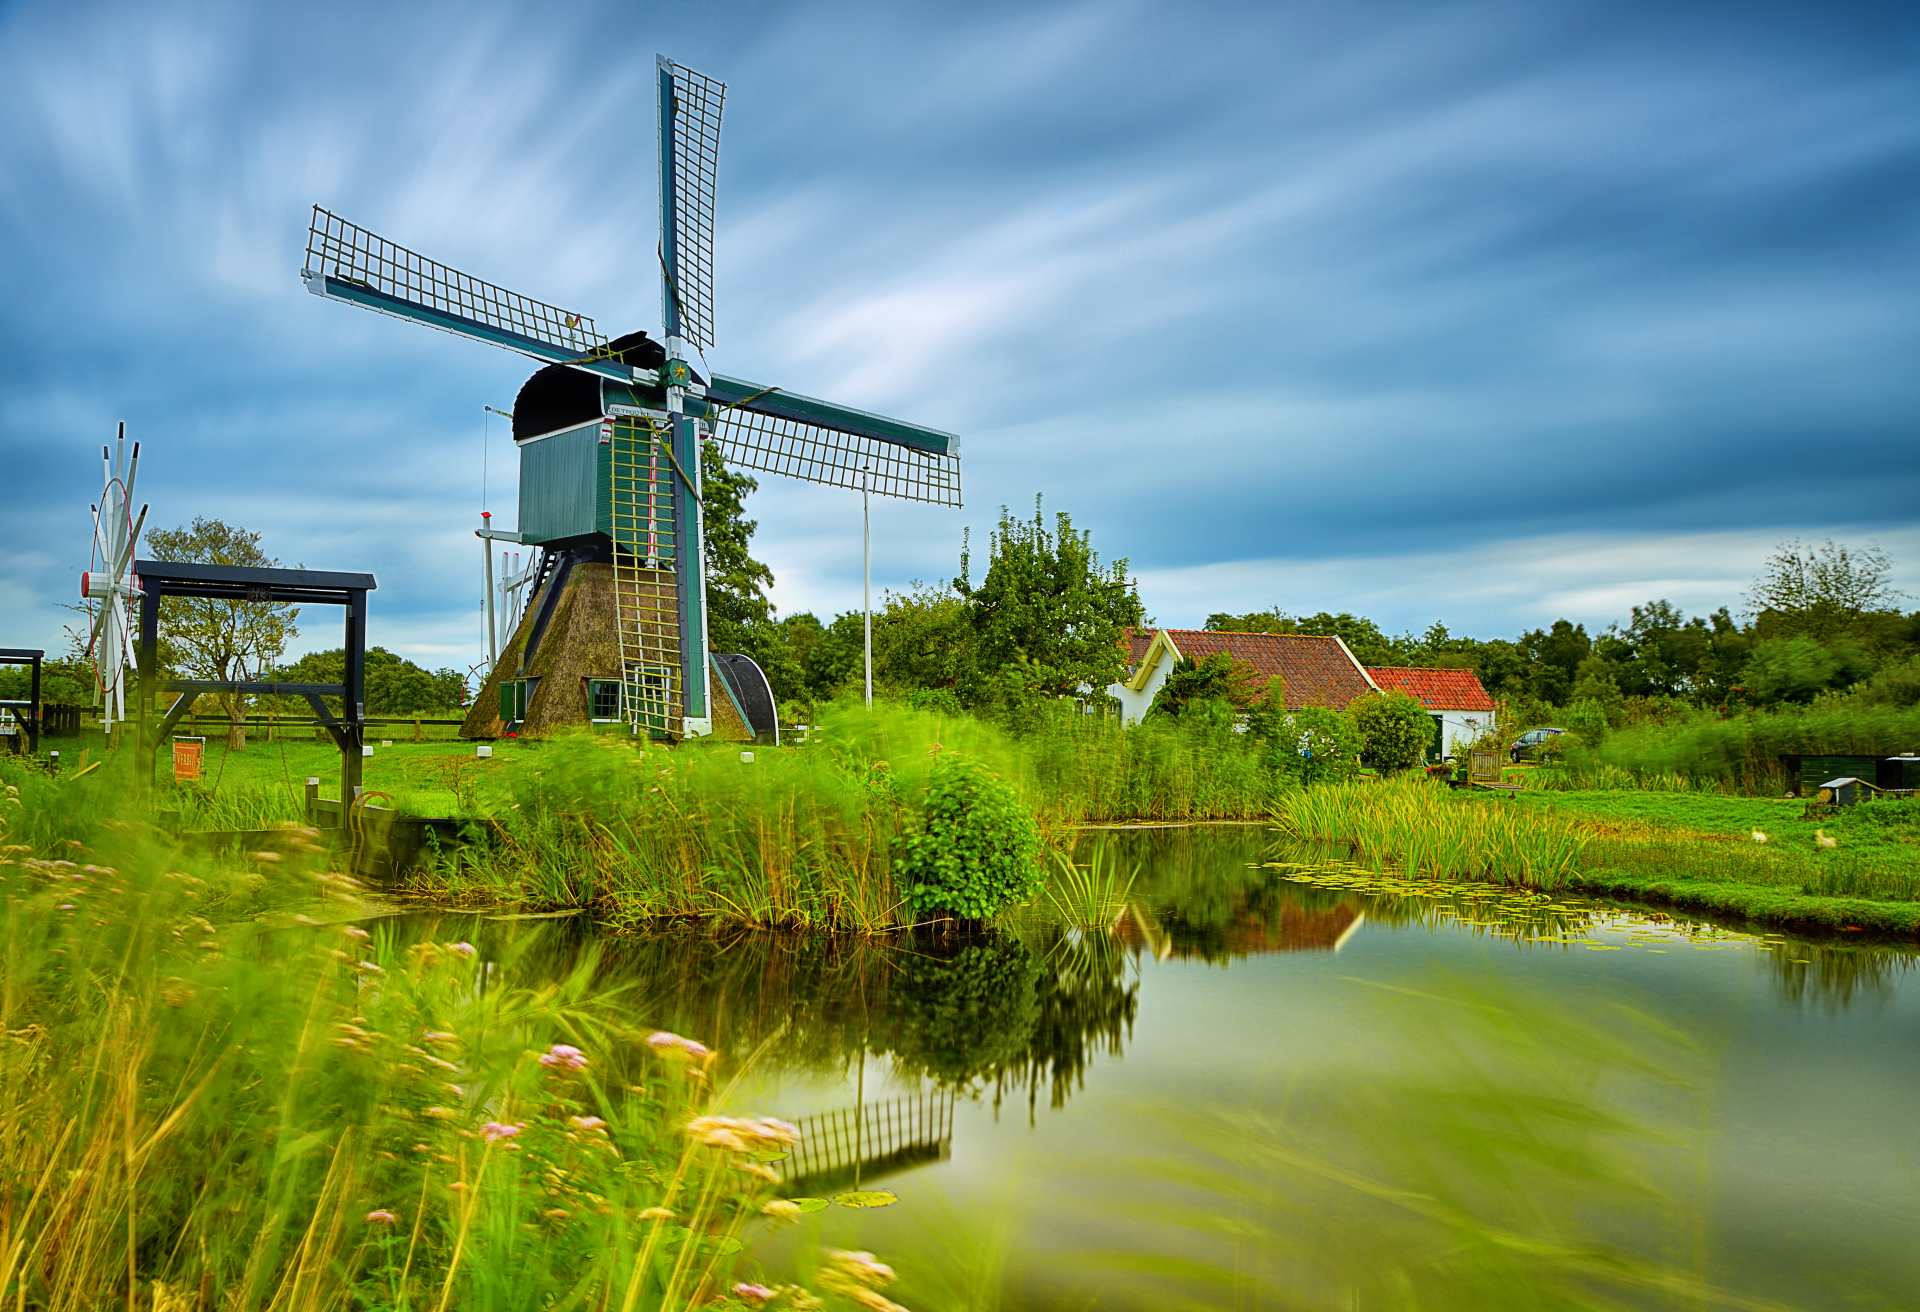 Old windmill in the village of Tienhoven, Netherlands.